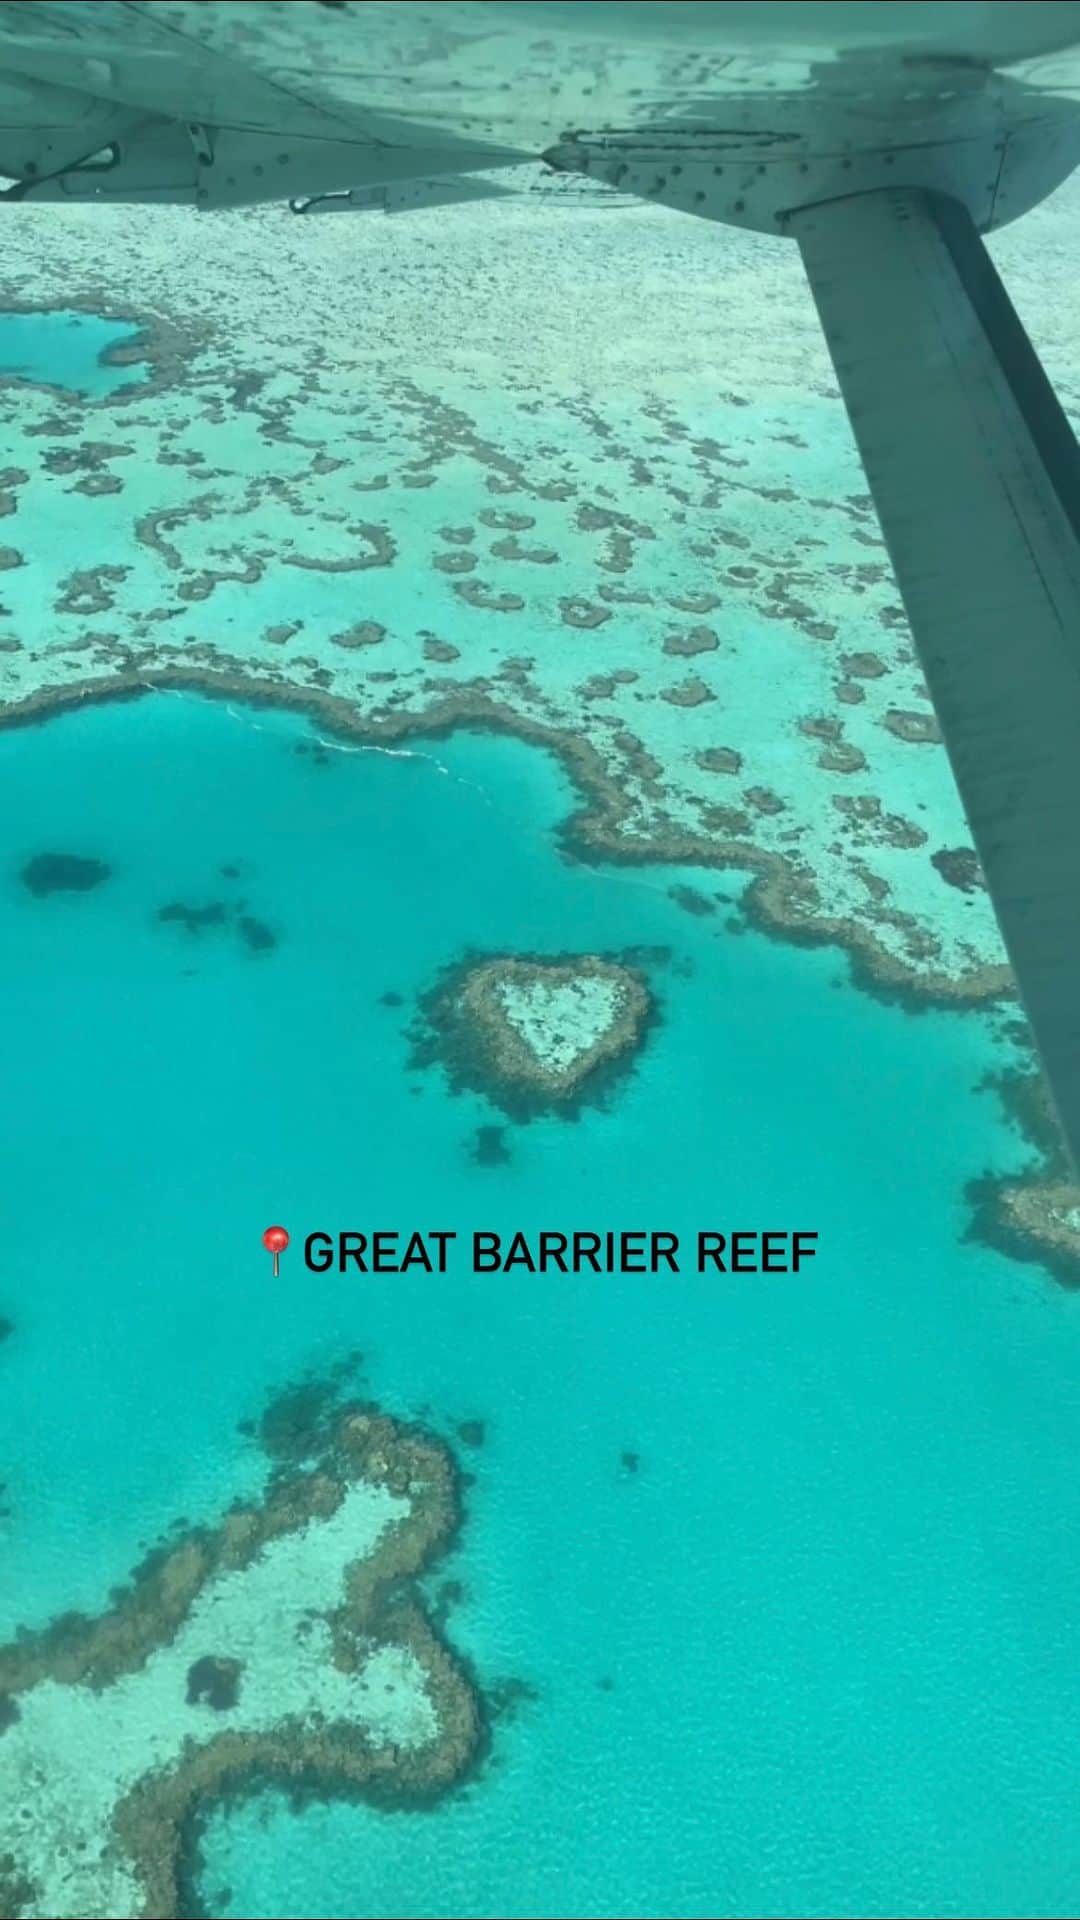 Lonely Planetのインスタグラム：「“Snorkeling or diving is a bucket-list item at the Great Barrier Reef (for good reason!) but it’s so peaceful and relaxing seeing the ocean dotted with reefs from above,” says LP staffer @deepa, who took a break from boats with this scenic flight over Queensland’s coast ✈️🌊  Bonus: you won’t get seasick 😅 “If you’re traveling to the Whitsundays or Cairns, pack precautionary motion sickness meds if you’re spending time on the water,” she adds. “I don’t usually feel queasy, but Australia’s waves are no joke.”」